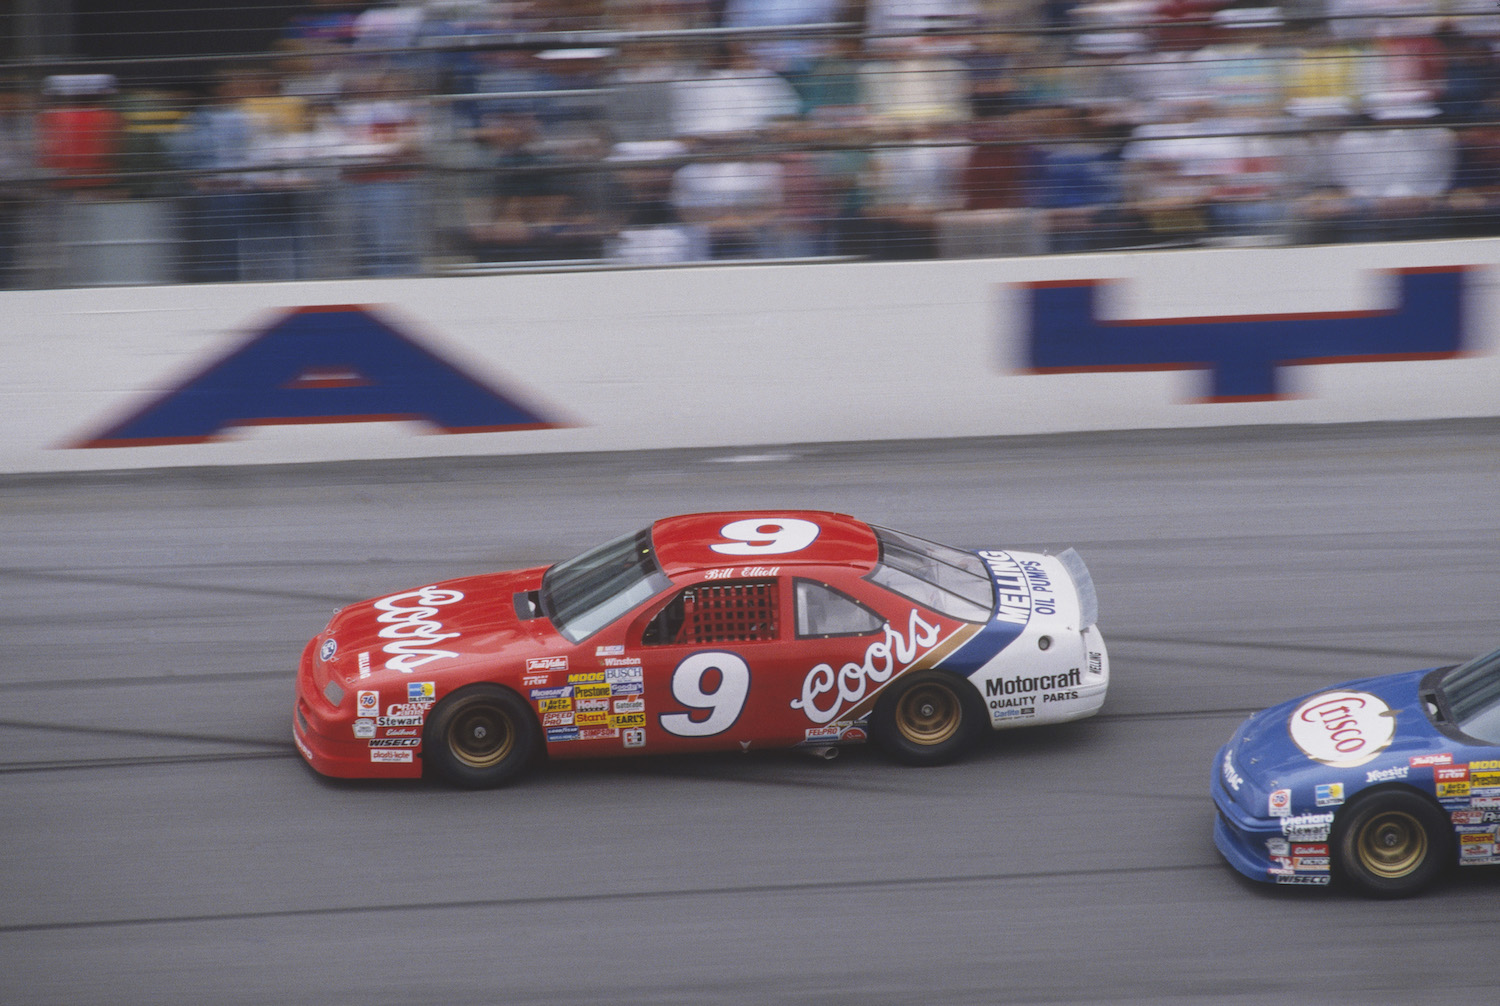 Bill Elliott driving the Coors Ford Thunderbird #9 car. In 1987 Bill Elliott would set a top-speed NASCAR record while qualifying at Talladega that would last for over thirty years. | Photo by Focus on Sport/Getty Images